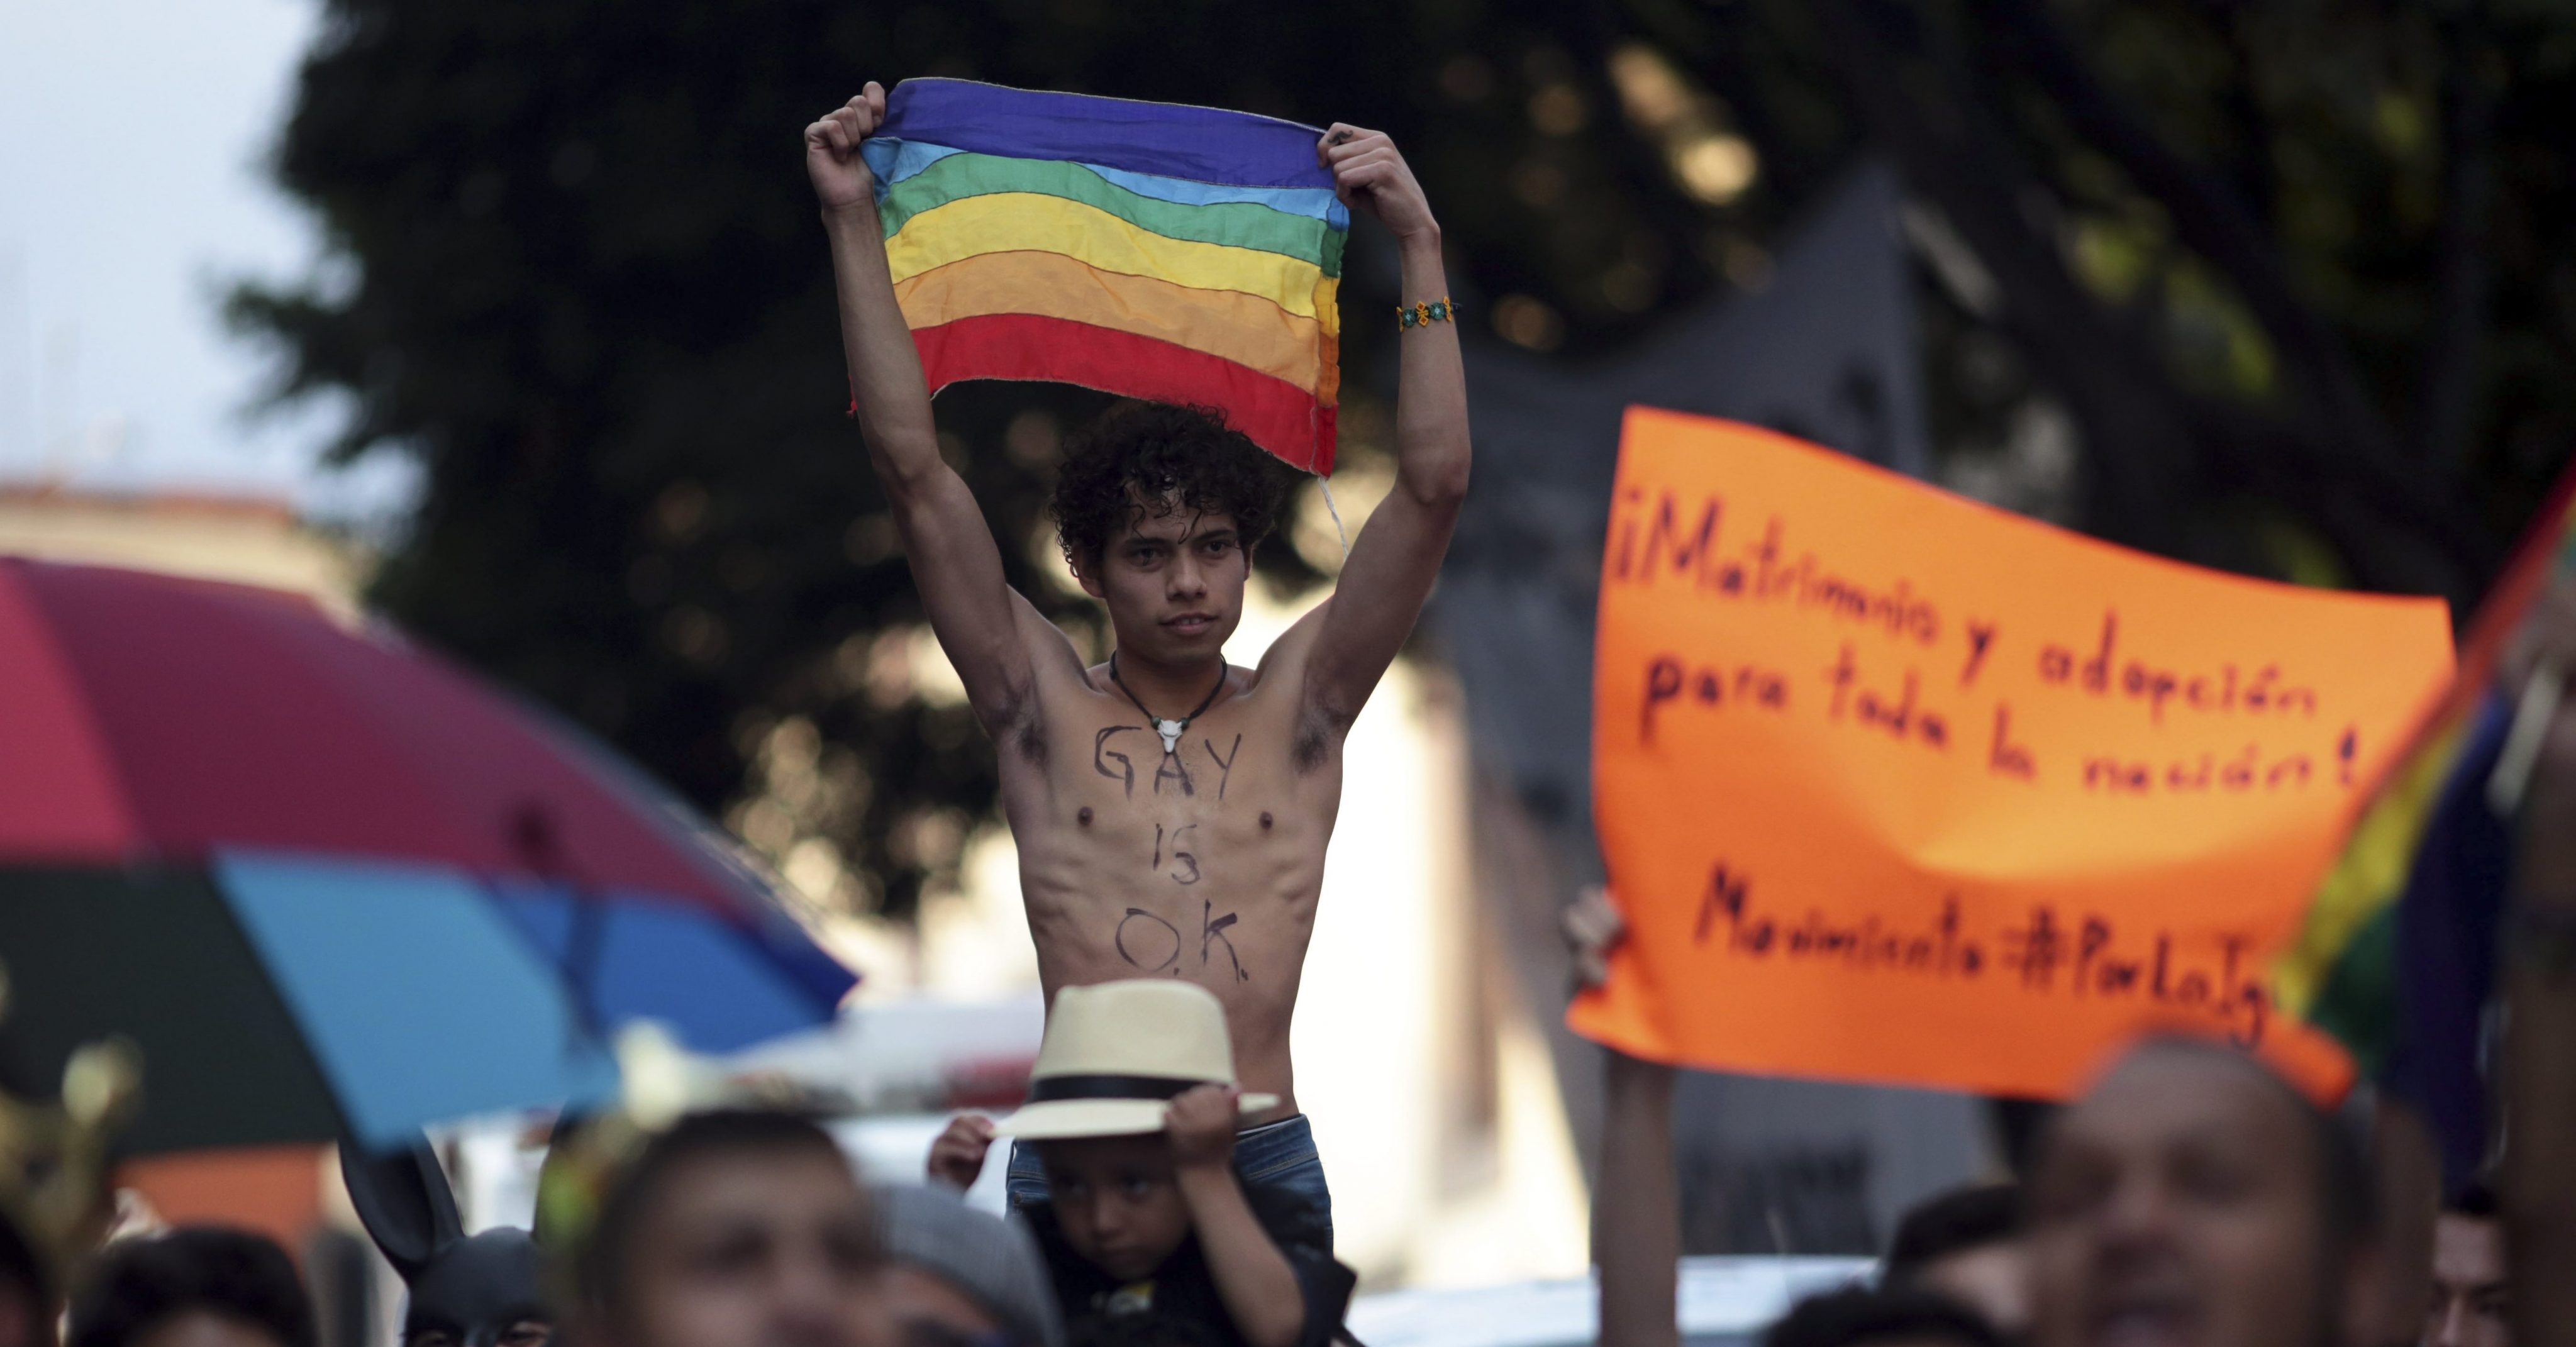 Yucatan Congress rejects the equal marriage